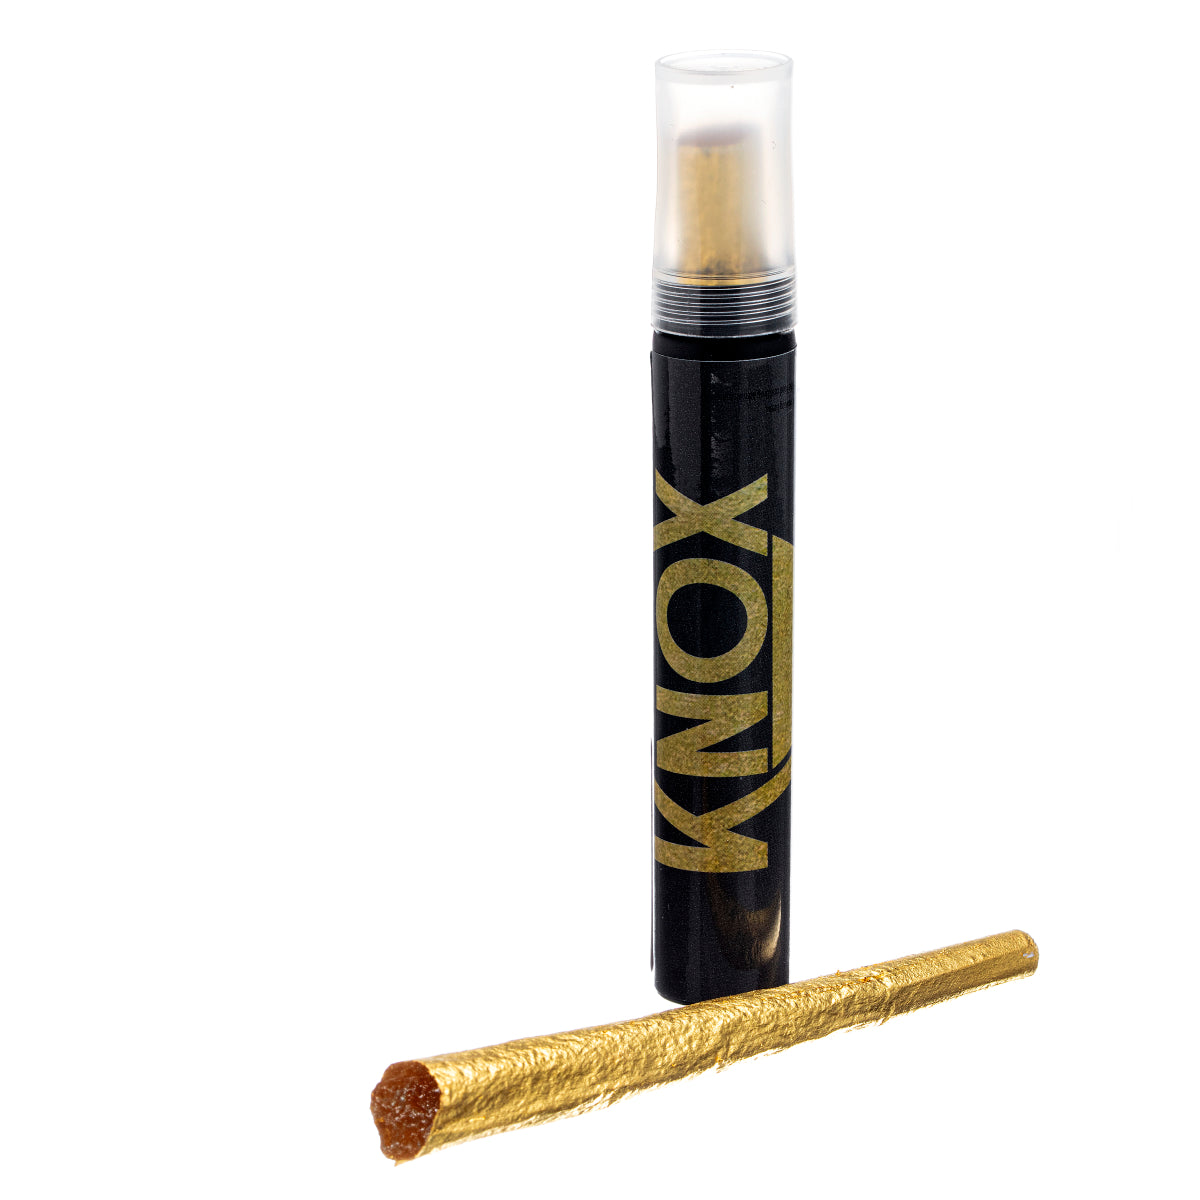 KNOX 24K Gold King Size Cone